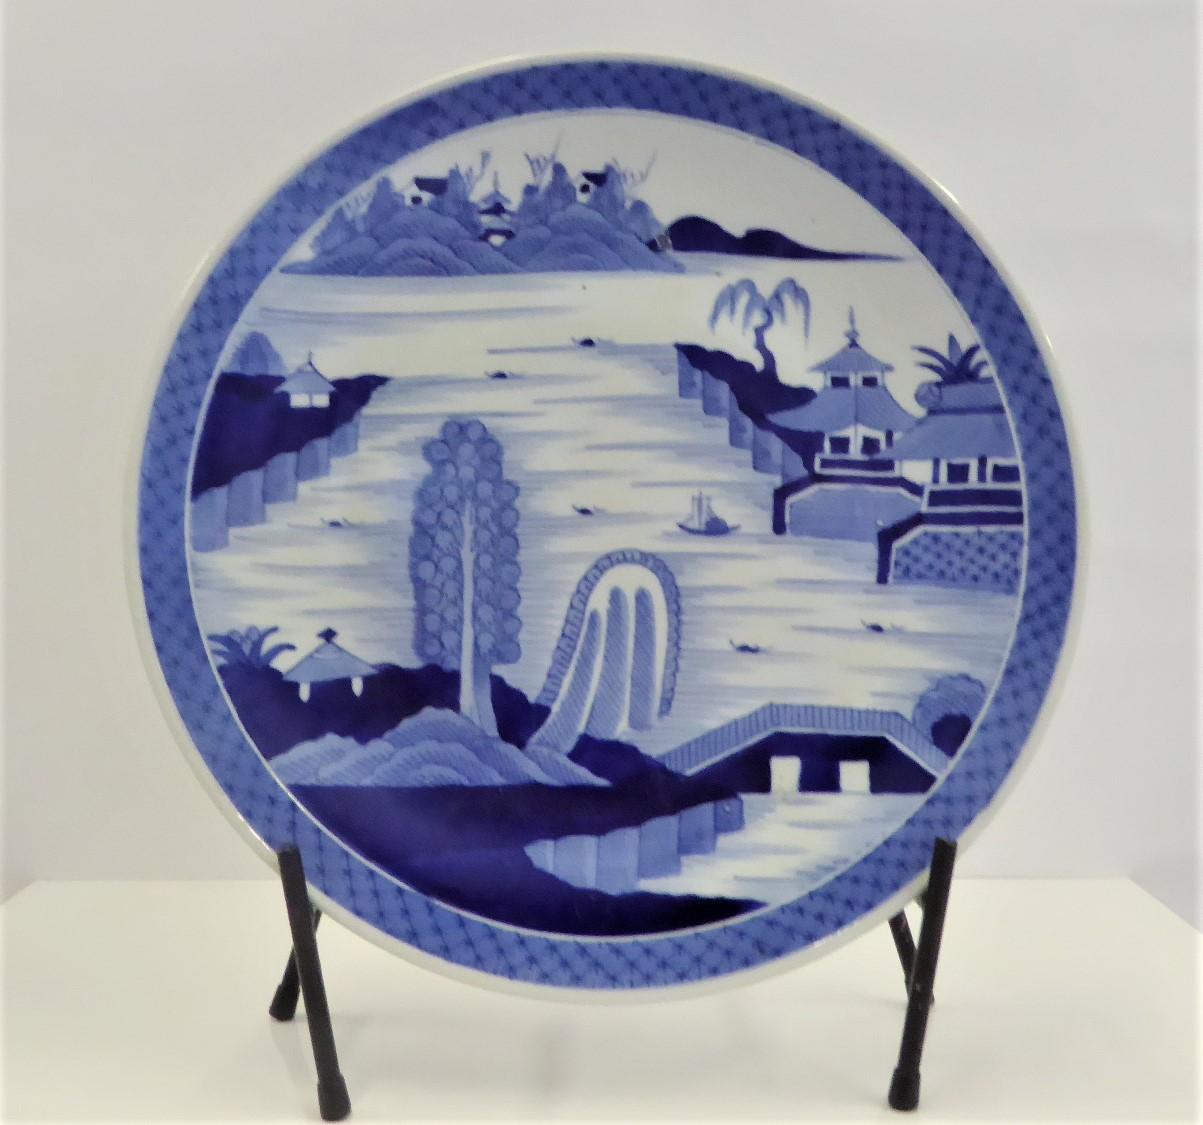 REDUCED FROM $650....Beautiful 1950s blue and white Japanese Imari charger depicting a serene hand painted scene of a village by river side with boats, a bridge and islands on the background. The rim in the back has stylized floral